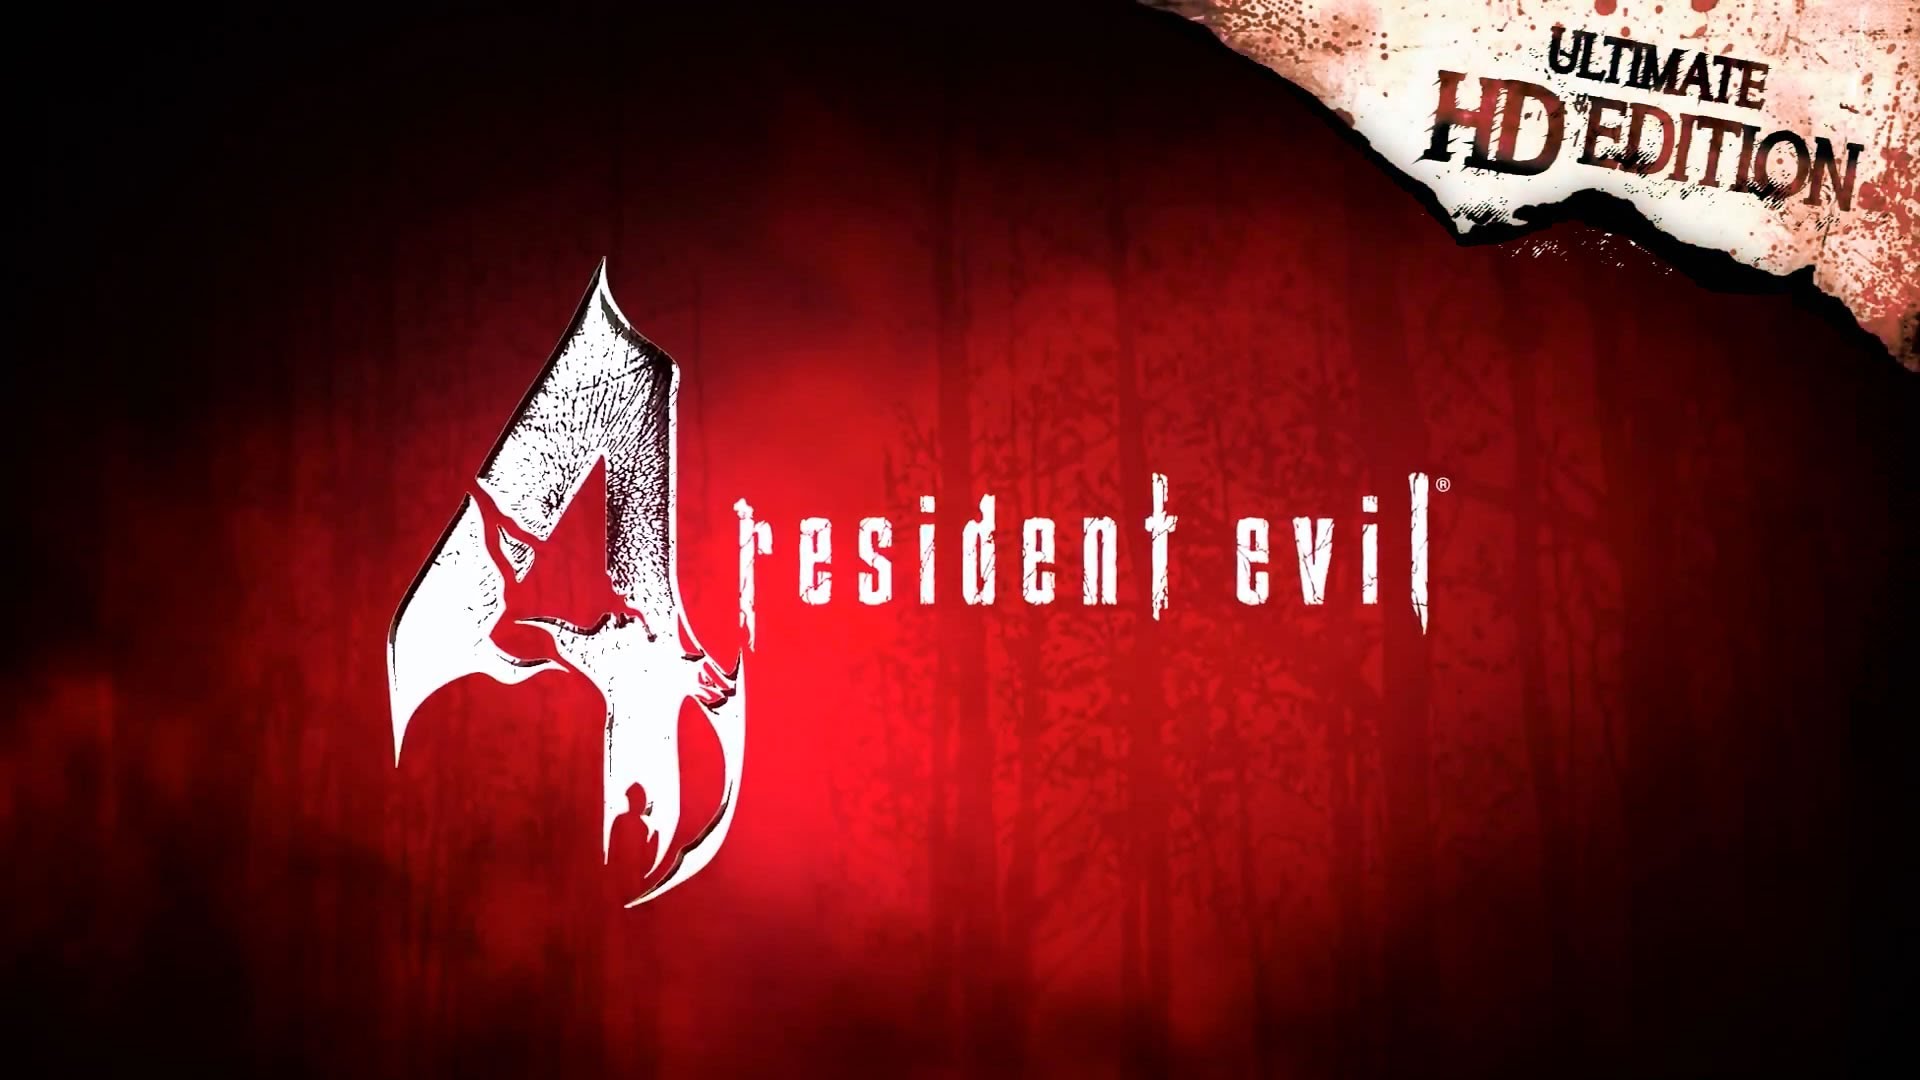 Steam resident evil 4 ultimate hd фото 4